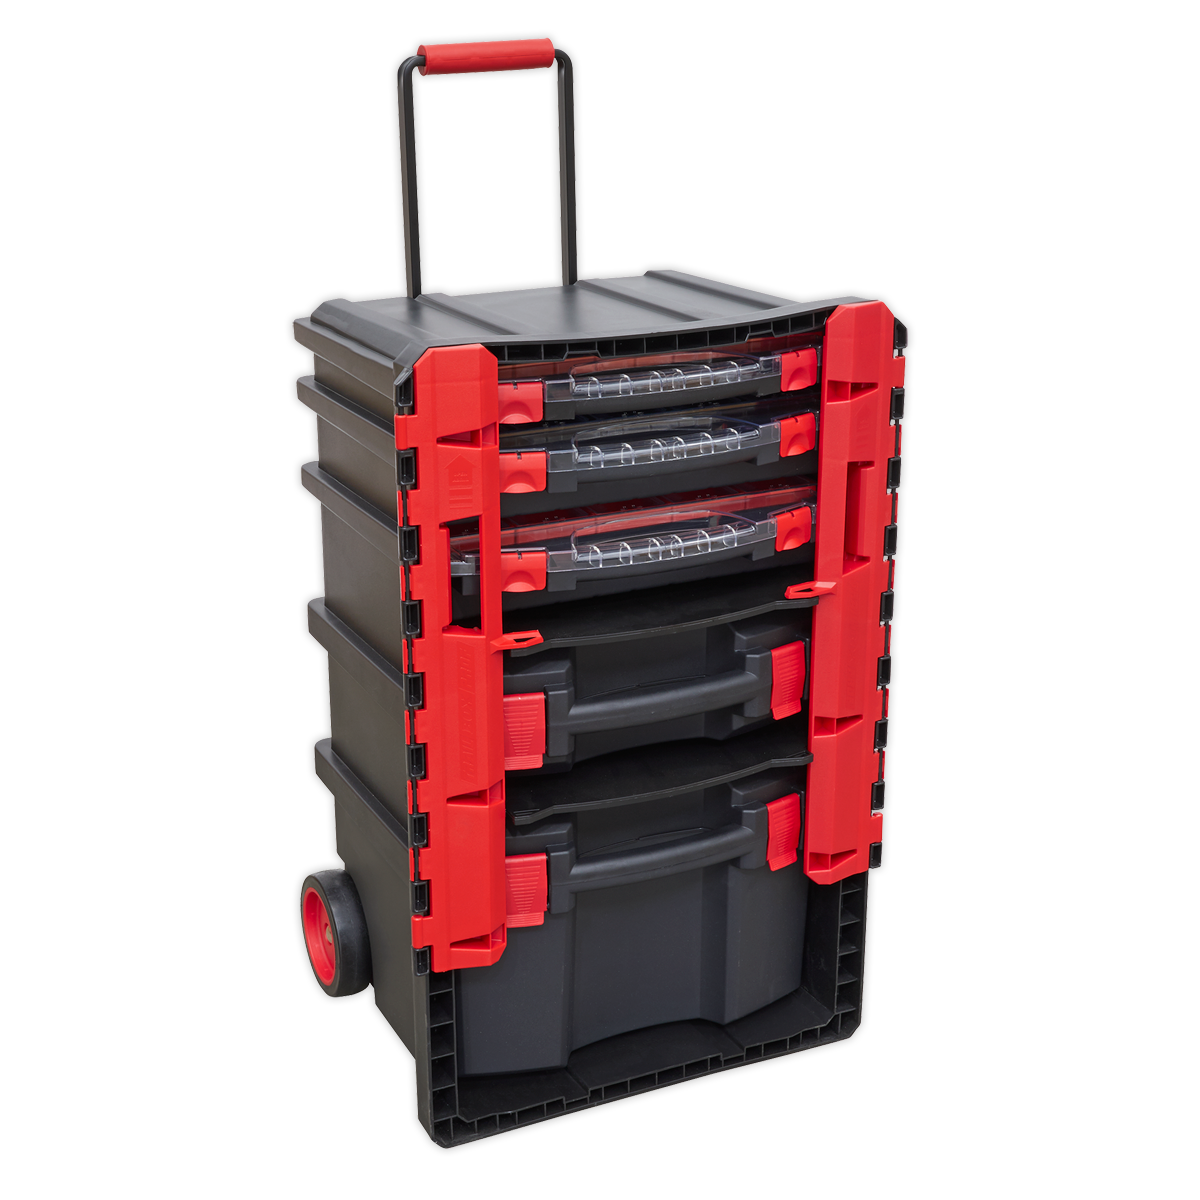 Professional Mobile Toolbox with 5 Removable Storage Cases - AP860 - Farming Parts